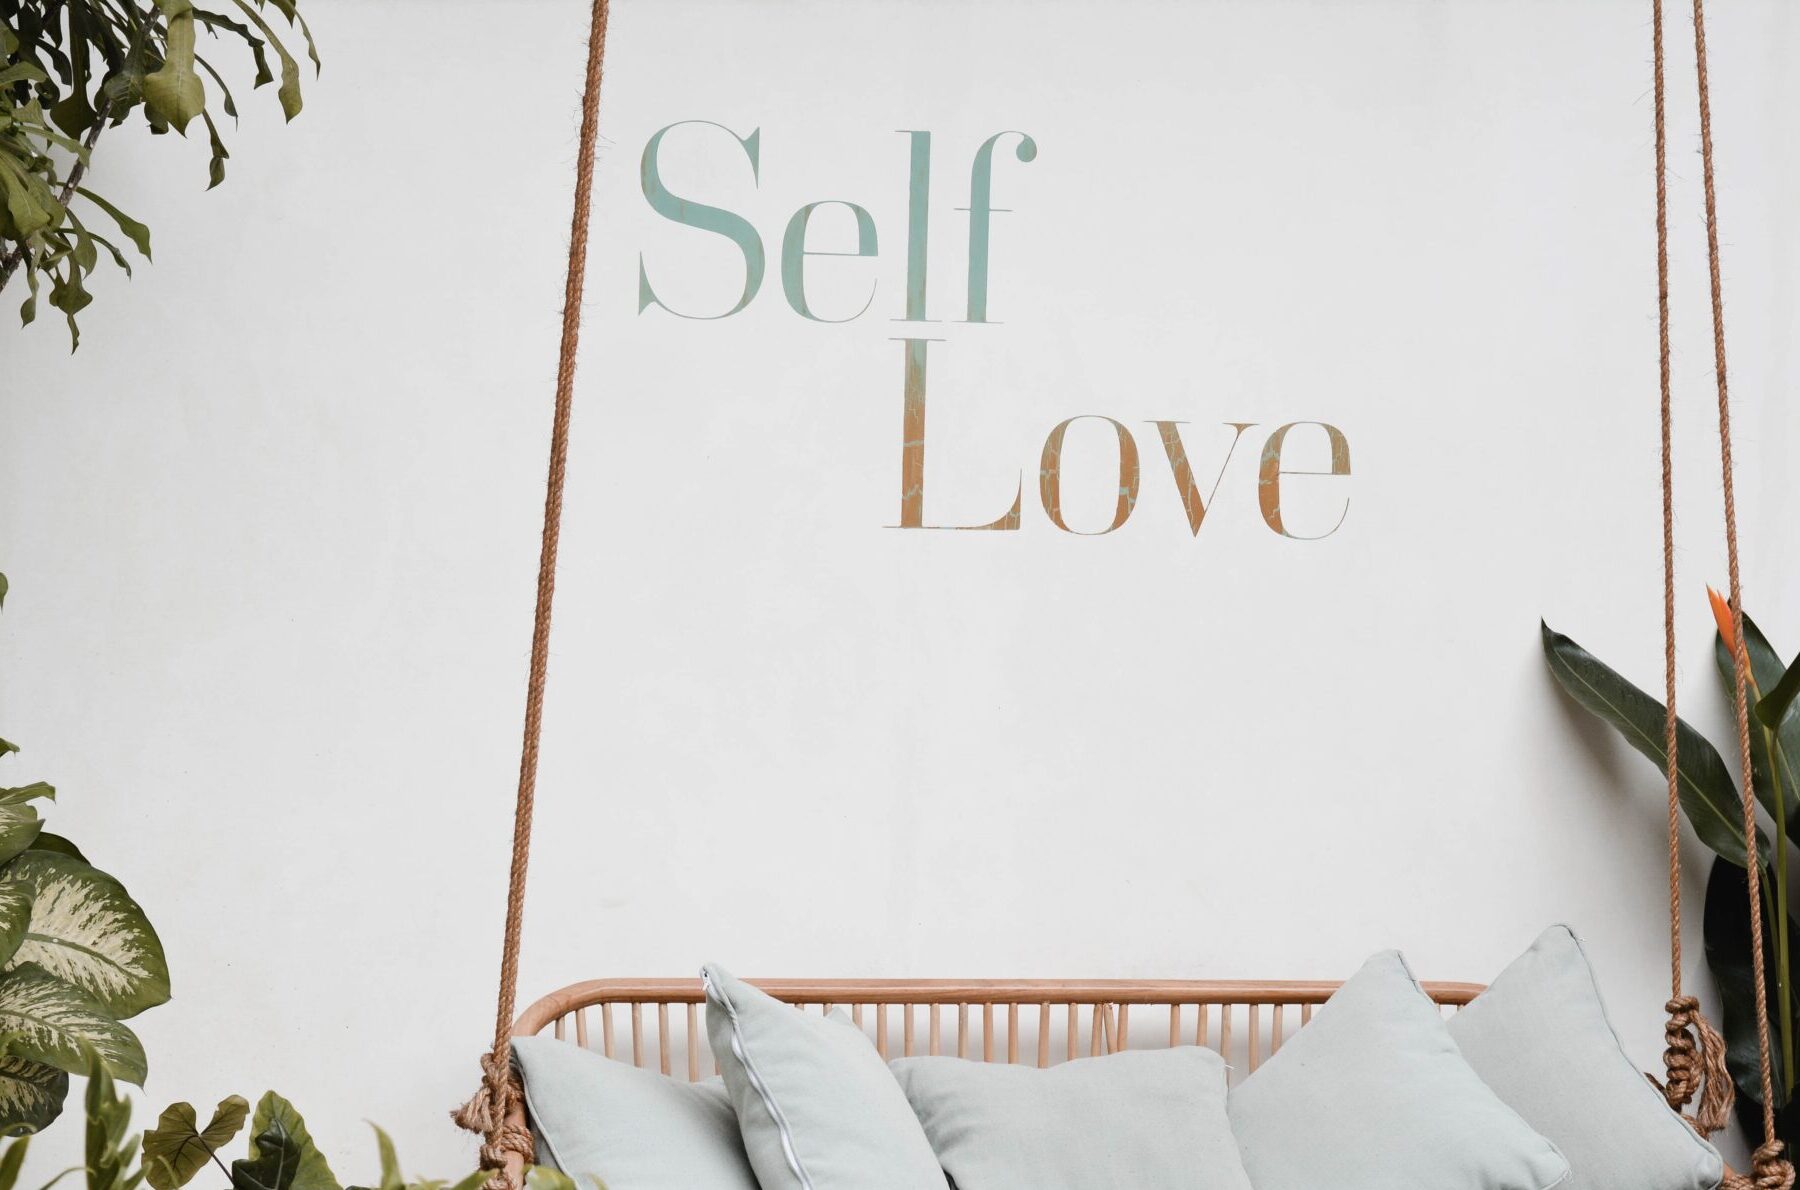 Self-love: 7 unexpected ways to love yourself more love, self love, self acceptance, worthy, self worth, being loved, deserving, good enough, life coach, life coaching, relationship coach, corinne blum, www.corinneblum.com